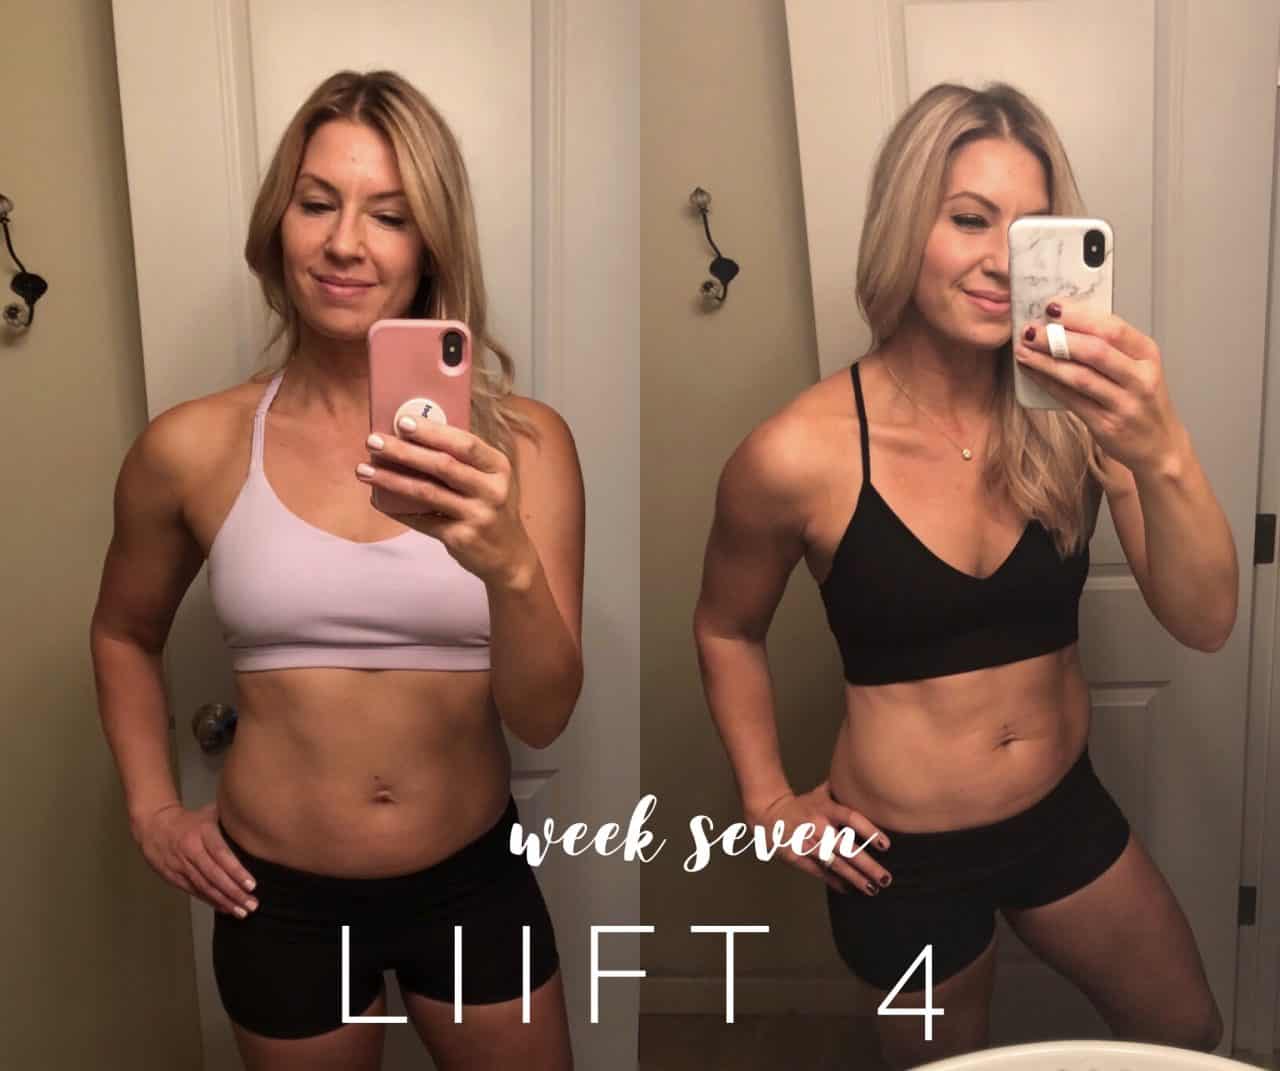 Week 7 Liift 4 Review - A Mom's Weight Loss Transformation!, liift 4, lift 4, lift 4 review, liift 4 review, lift 4 beachbody, liift 4 beachbody, lift 4 transformation, lift 4 mom, liift 4 mom, liift 4 weight loss, lift 4, lift 4 review, lift 4 weight loss, lift 4 mom, liift 4 weight loss transformation, why liift 4, lift 4 moms, liift 4 moms, mom lift 4, mom liift 4, moms liift 4, moms lift 4, lift 4 2018, liift 4 2018